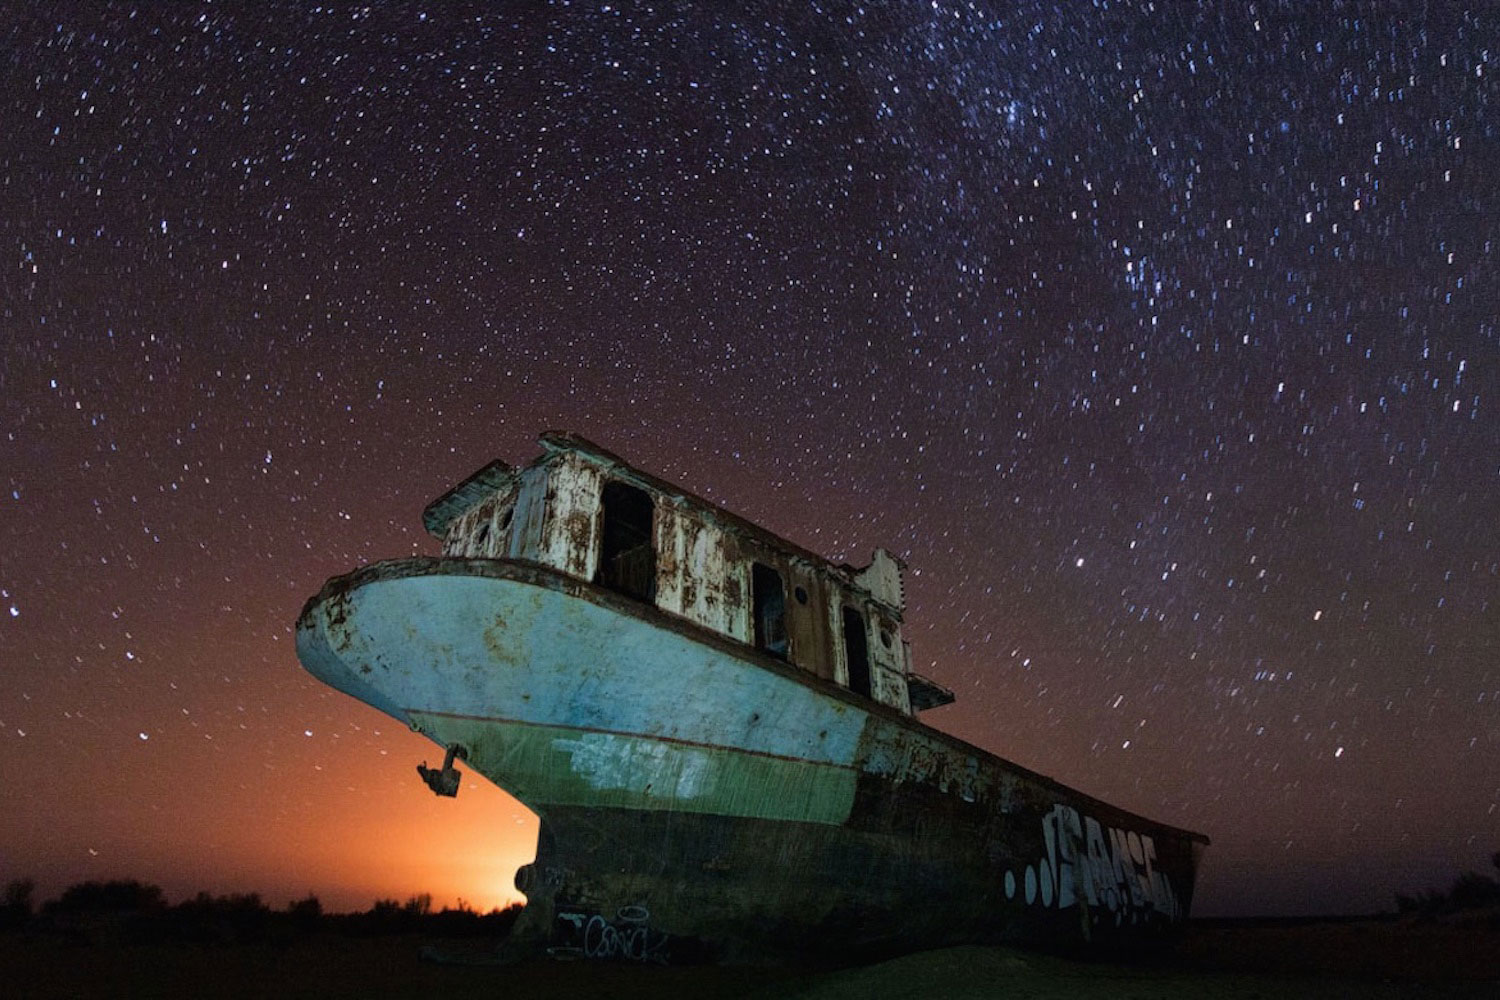 The night sky above rusting ships on the former Aral Sea. Image: Courtesy of Stihia Festival 